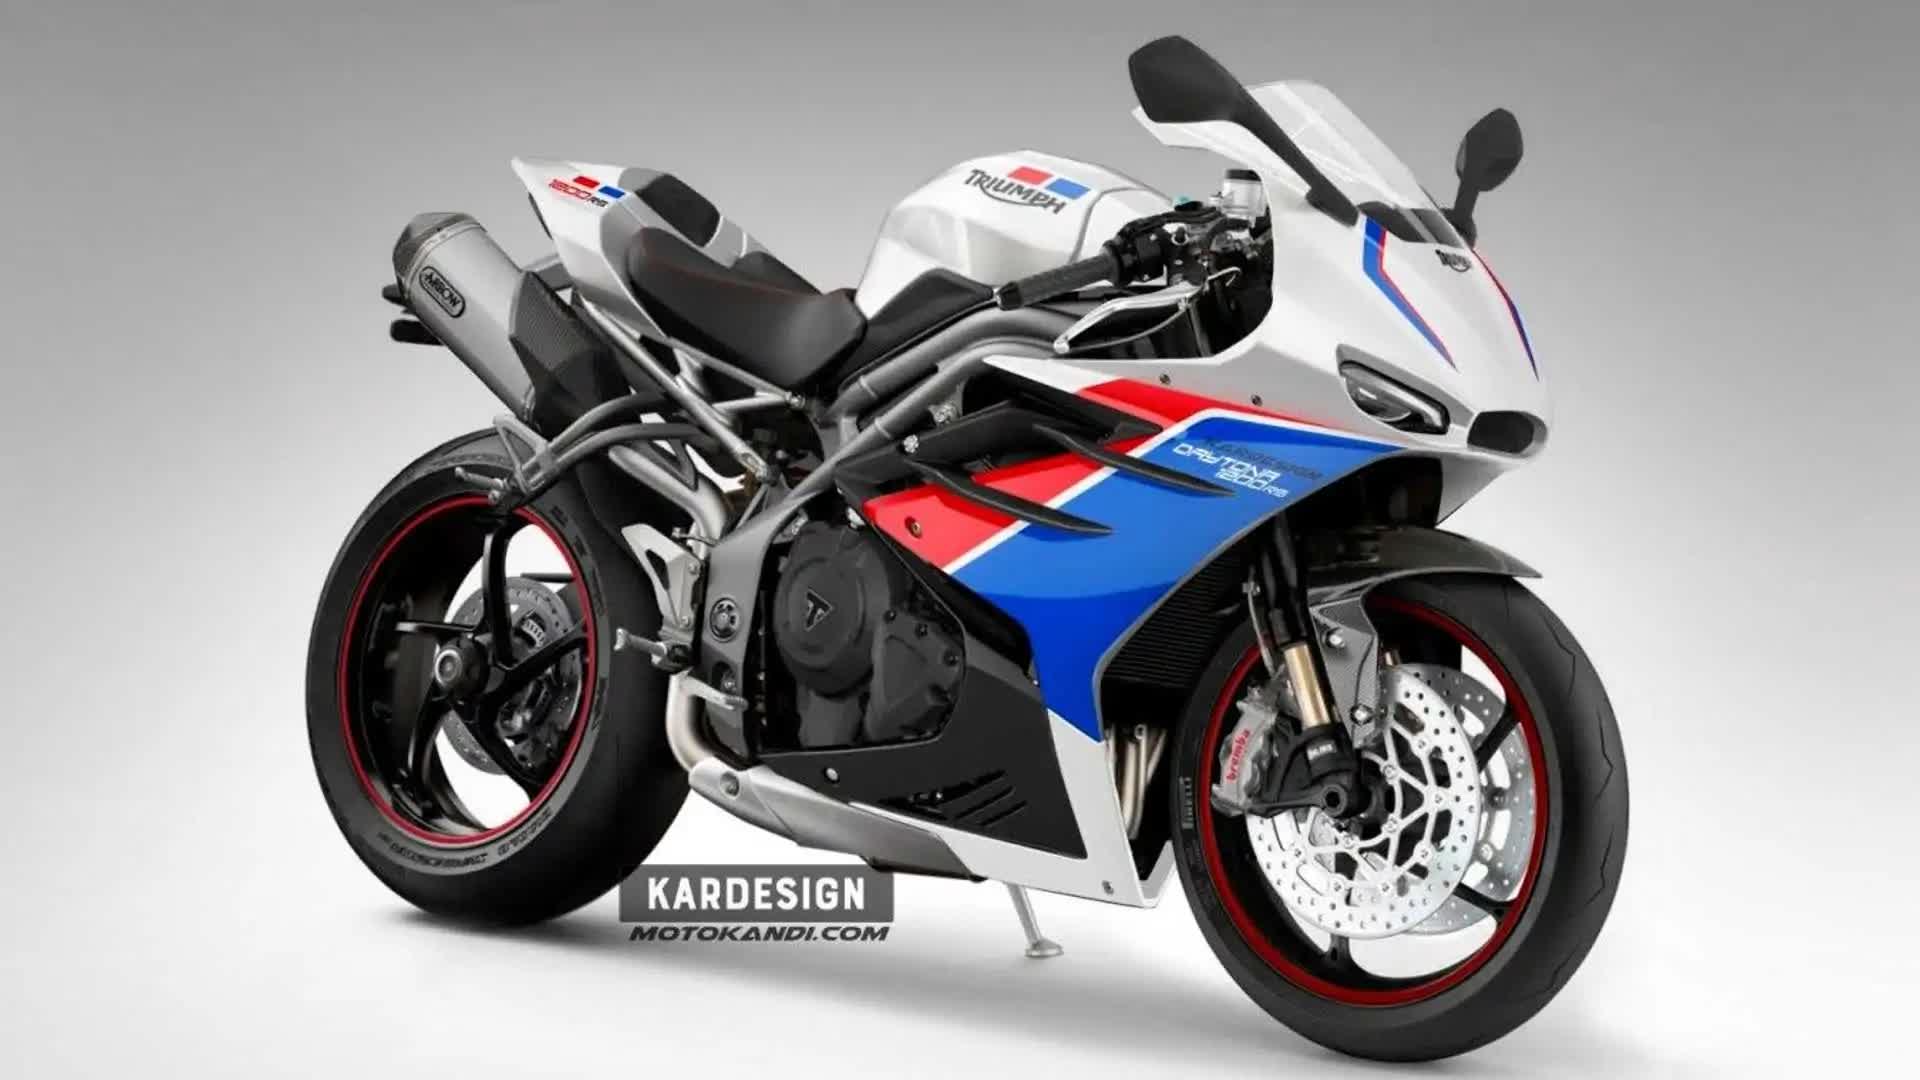 What could a Daytona 1200 look like?
- also in the MOTORCYCLES.NEWS APP